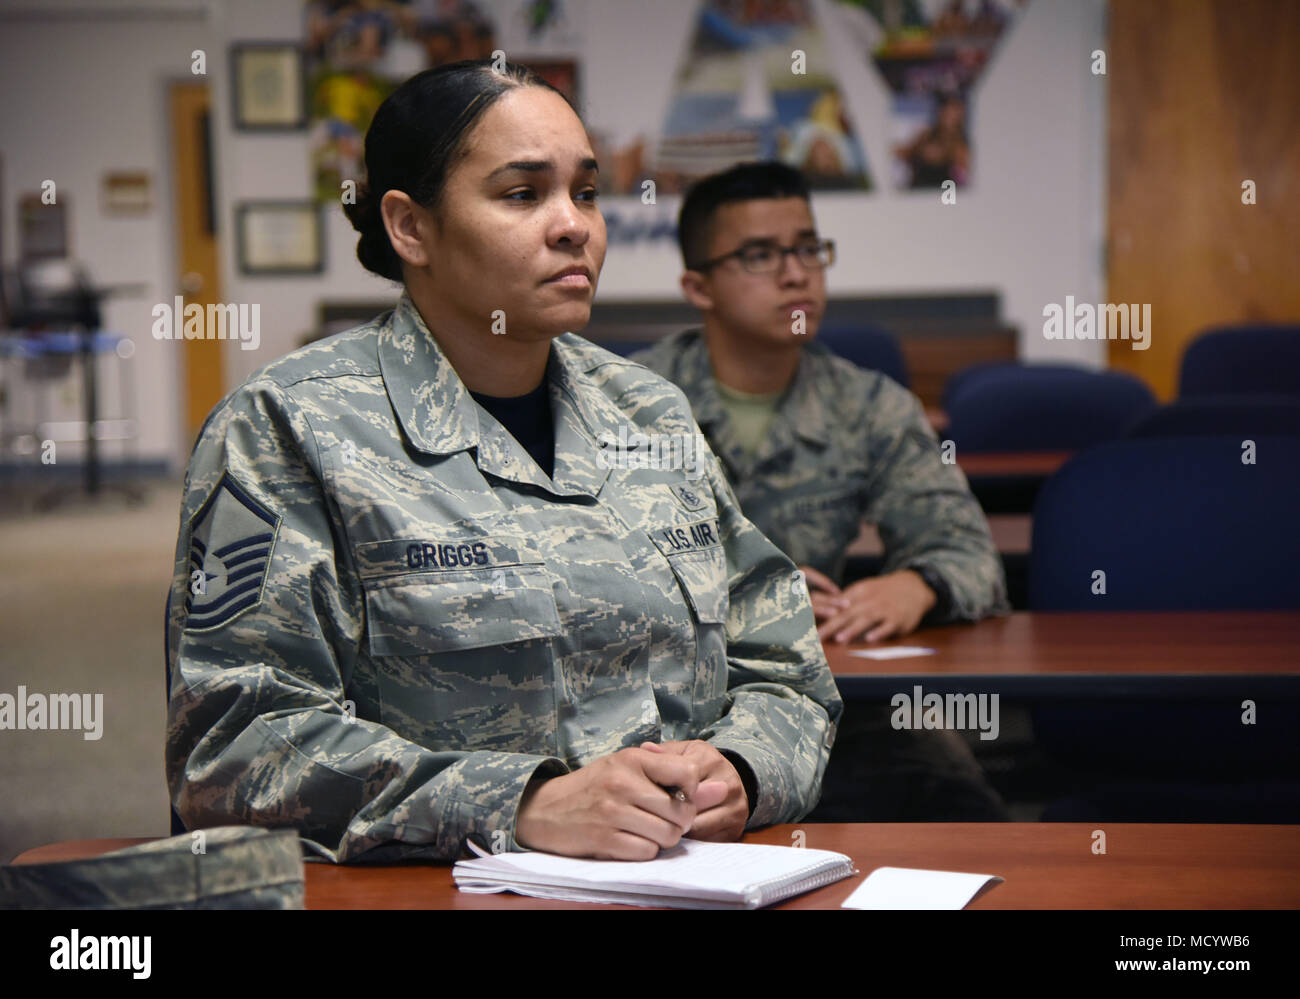 Master Sgt. Dennise Griggs, 81st Diagnostic and Therapeutics Squadron histopathology NCO in charge, and Airman 1st Class Nathaniel Gomez, 81st Dental Squadron dental technician, attend a “TSP Lunch N’ Learn with Liza” financial savings class at the Sablich Center March 2, 2018, on Keesler Air Force Base, Mississippi. The session was one of three held during military saves week. (U.S. Air Force photo by Kemberly Groue) Stock Photo